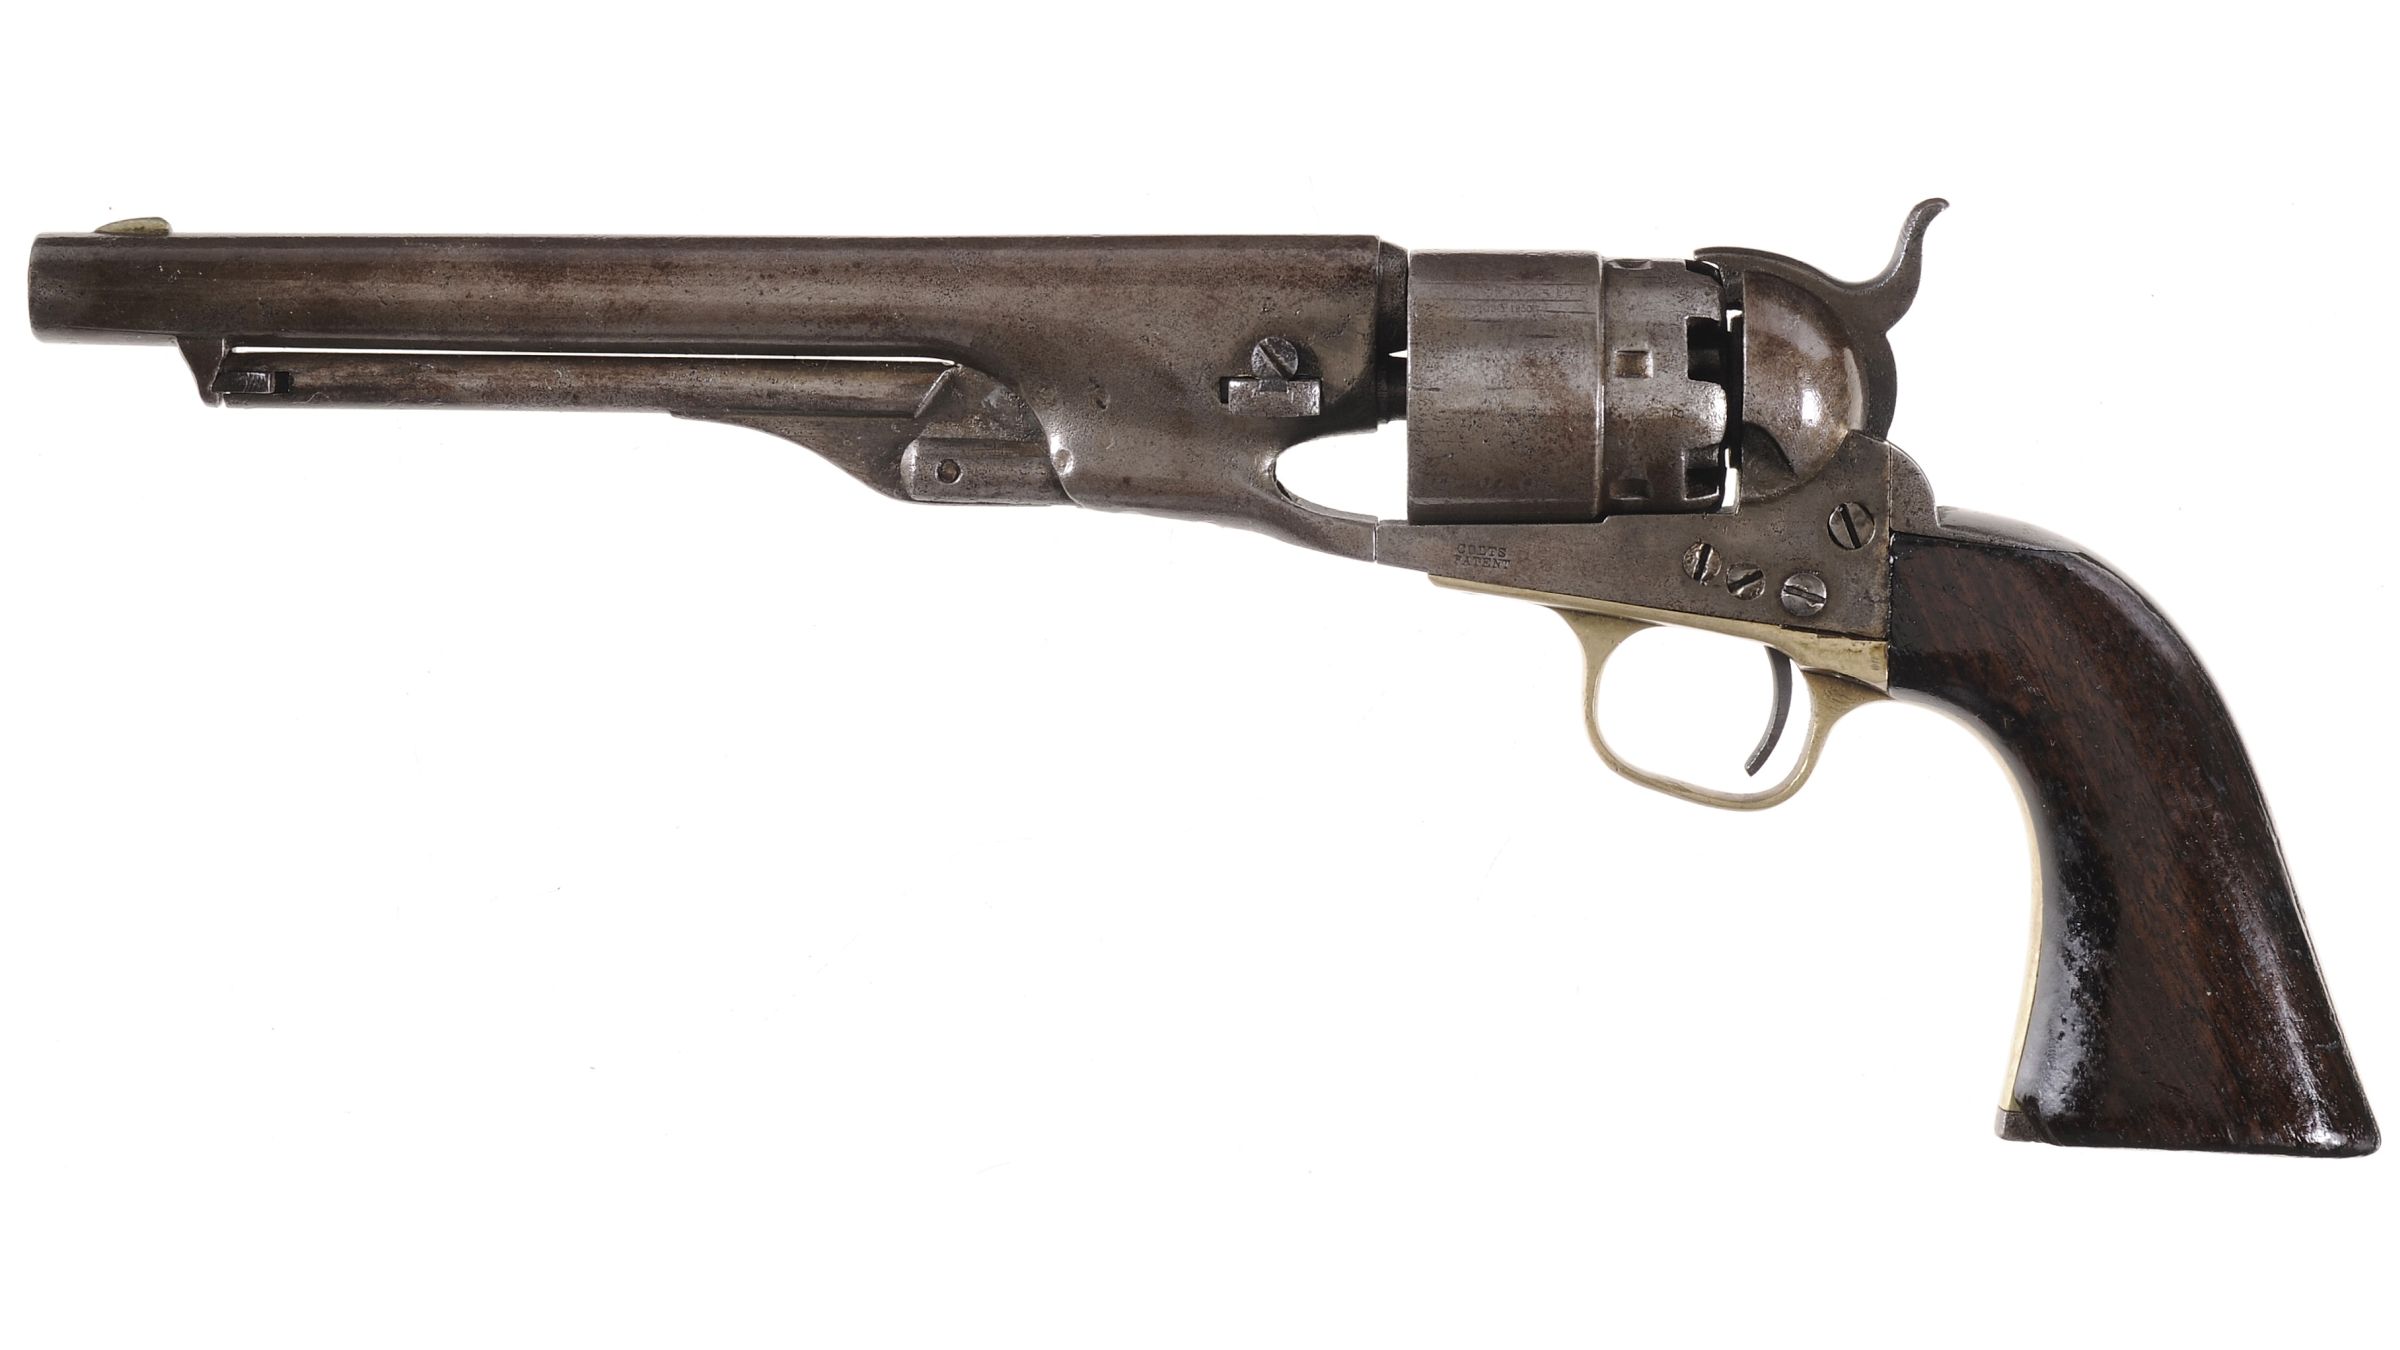 Interested in 1851 Colt Navy revolvers, but don't want to get ripped ...